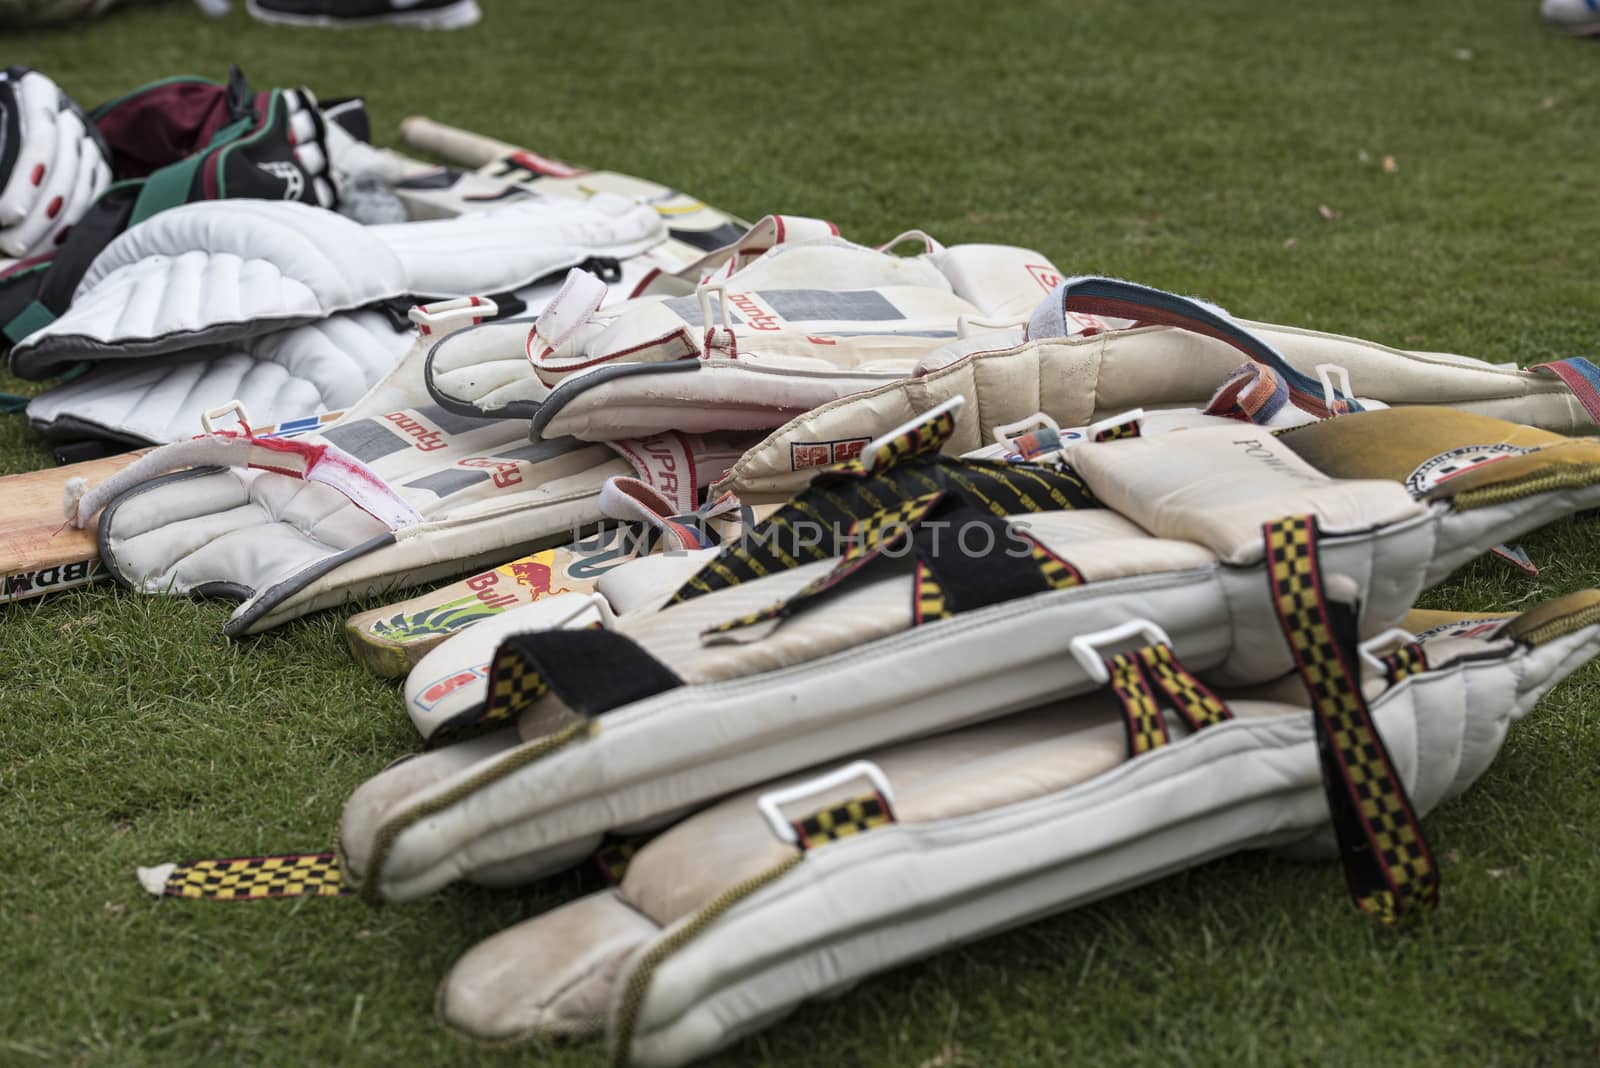 LOUGHBOROUGH, UK - July 2017 - cricket equipment piled up ready for use at a local charity cricket match